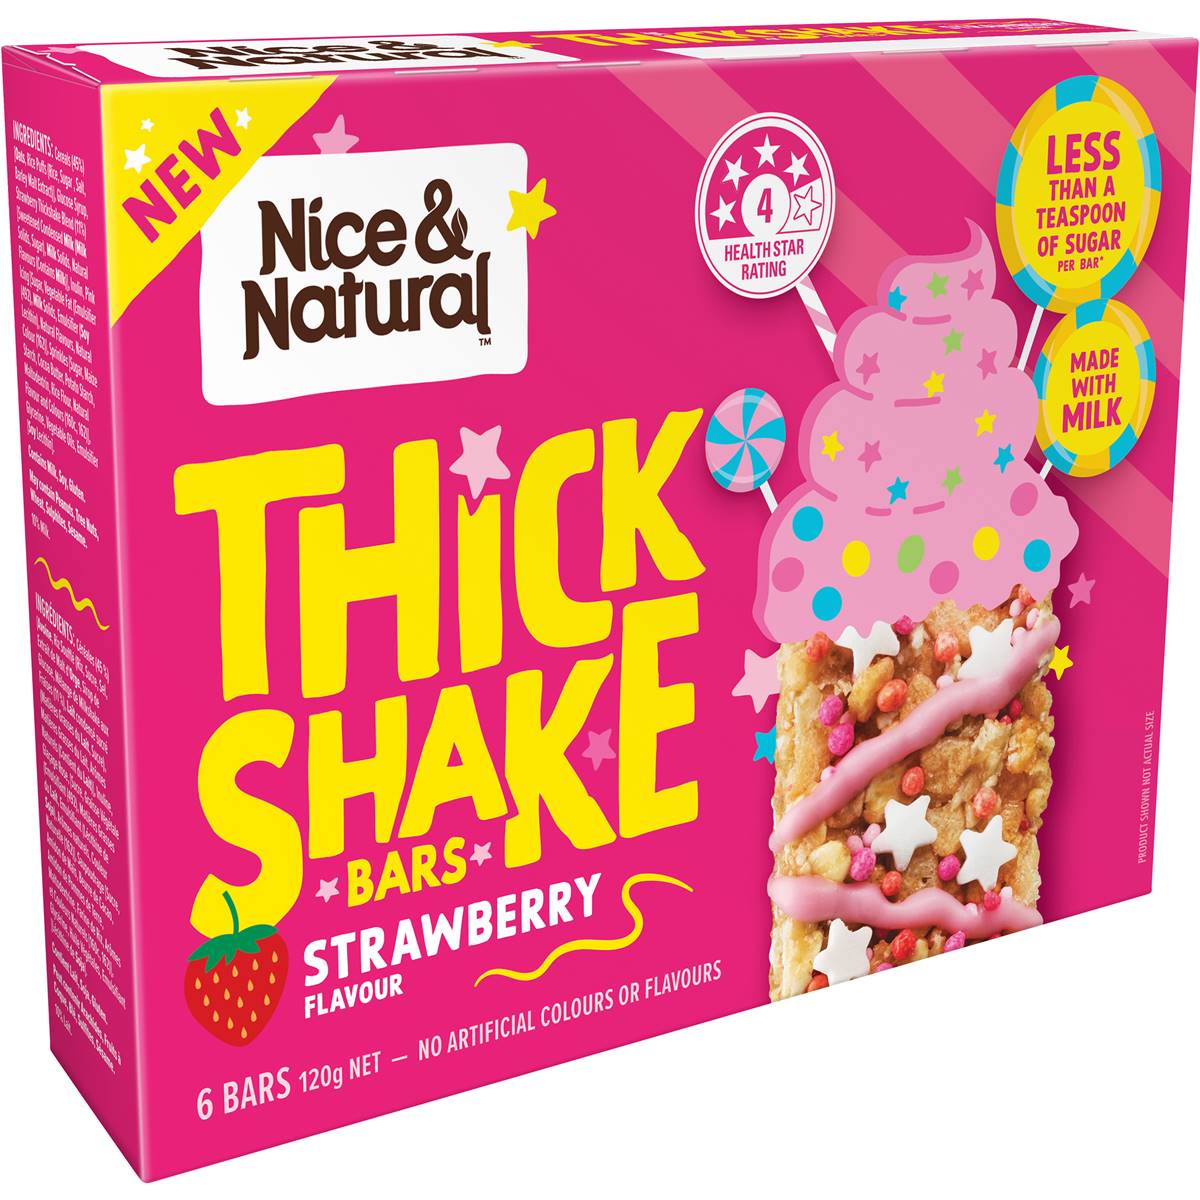 Nice & Natural Thick Shake Bars Strawberry Flavour 6x20g